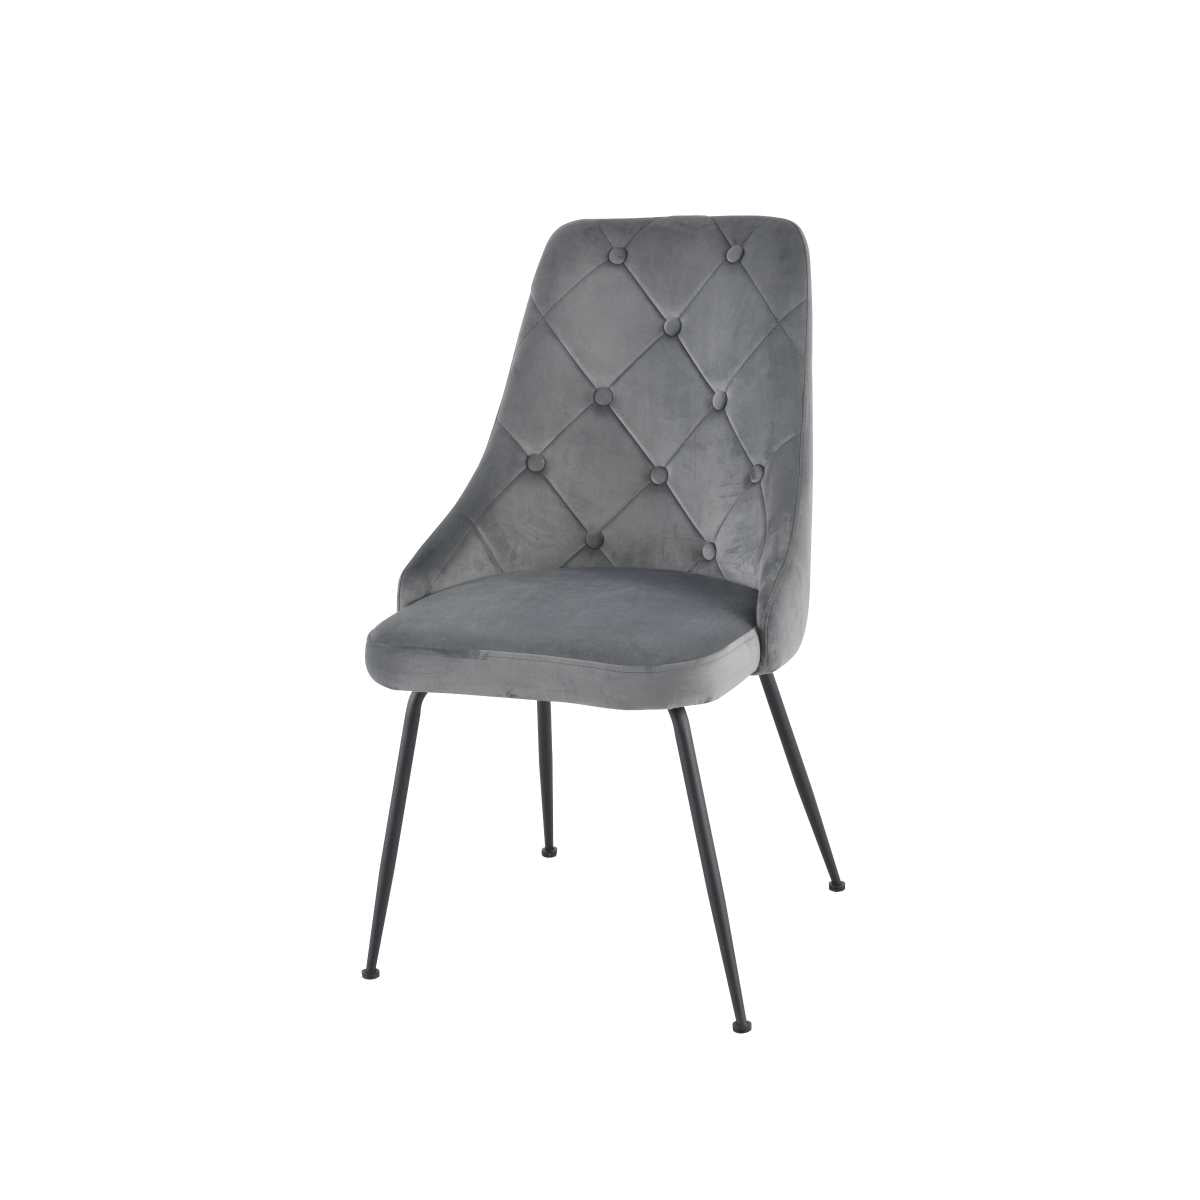 Plumeria Chairs Set Of 2 Grey With Black Legs 1321